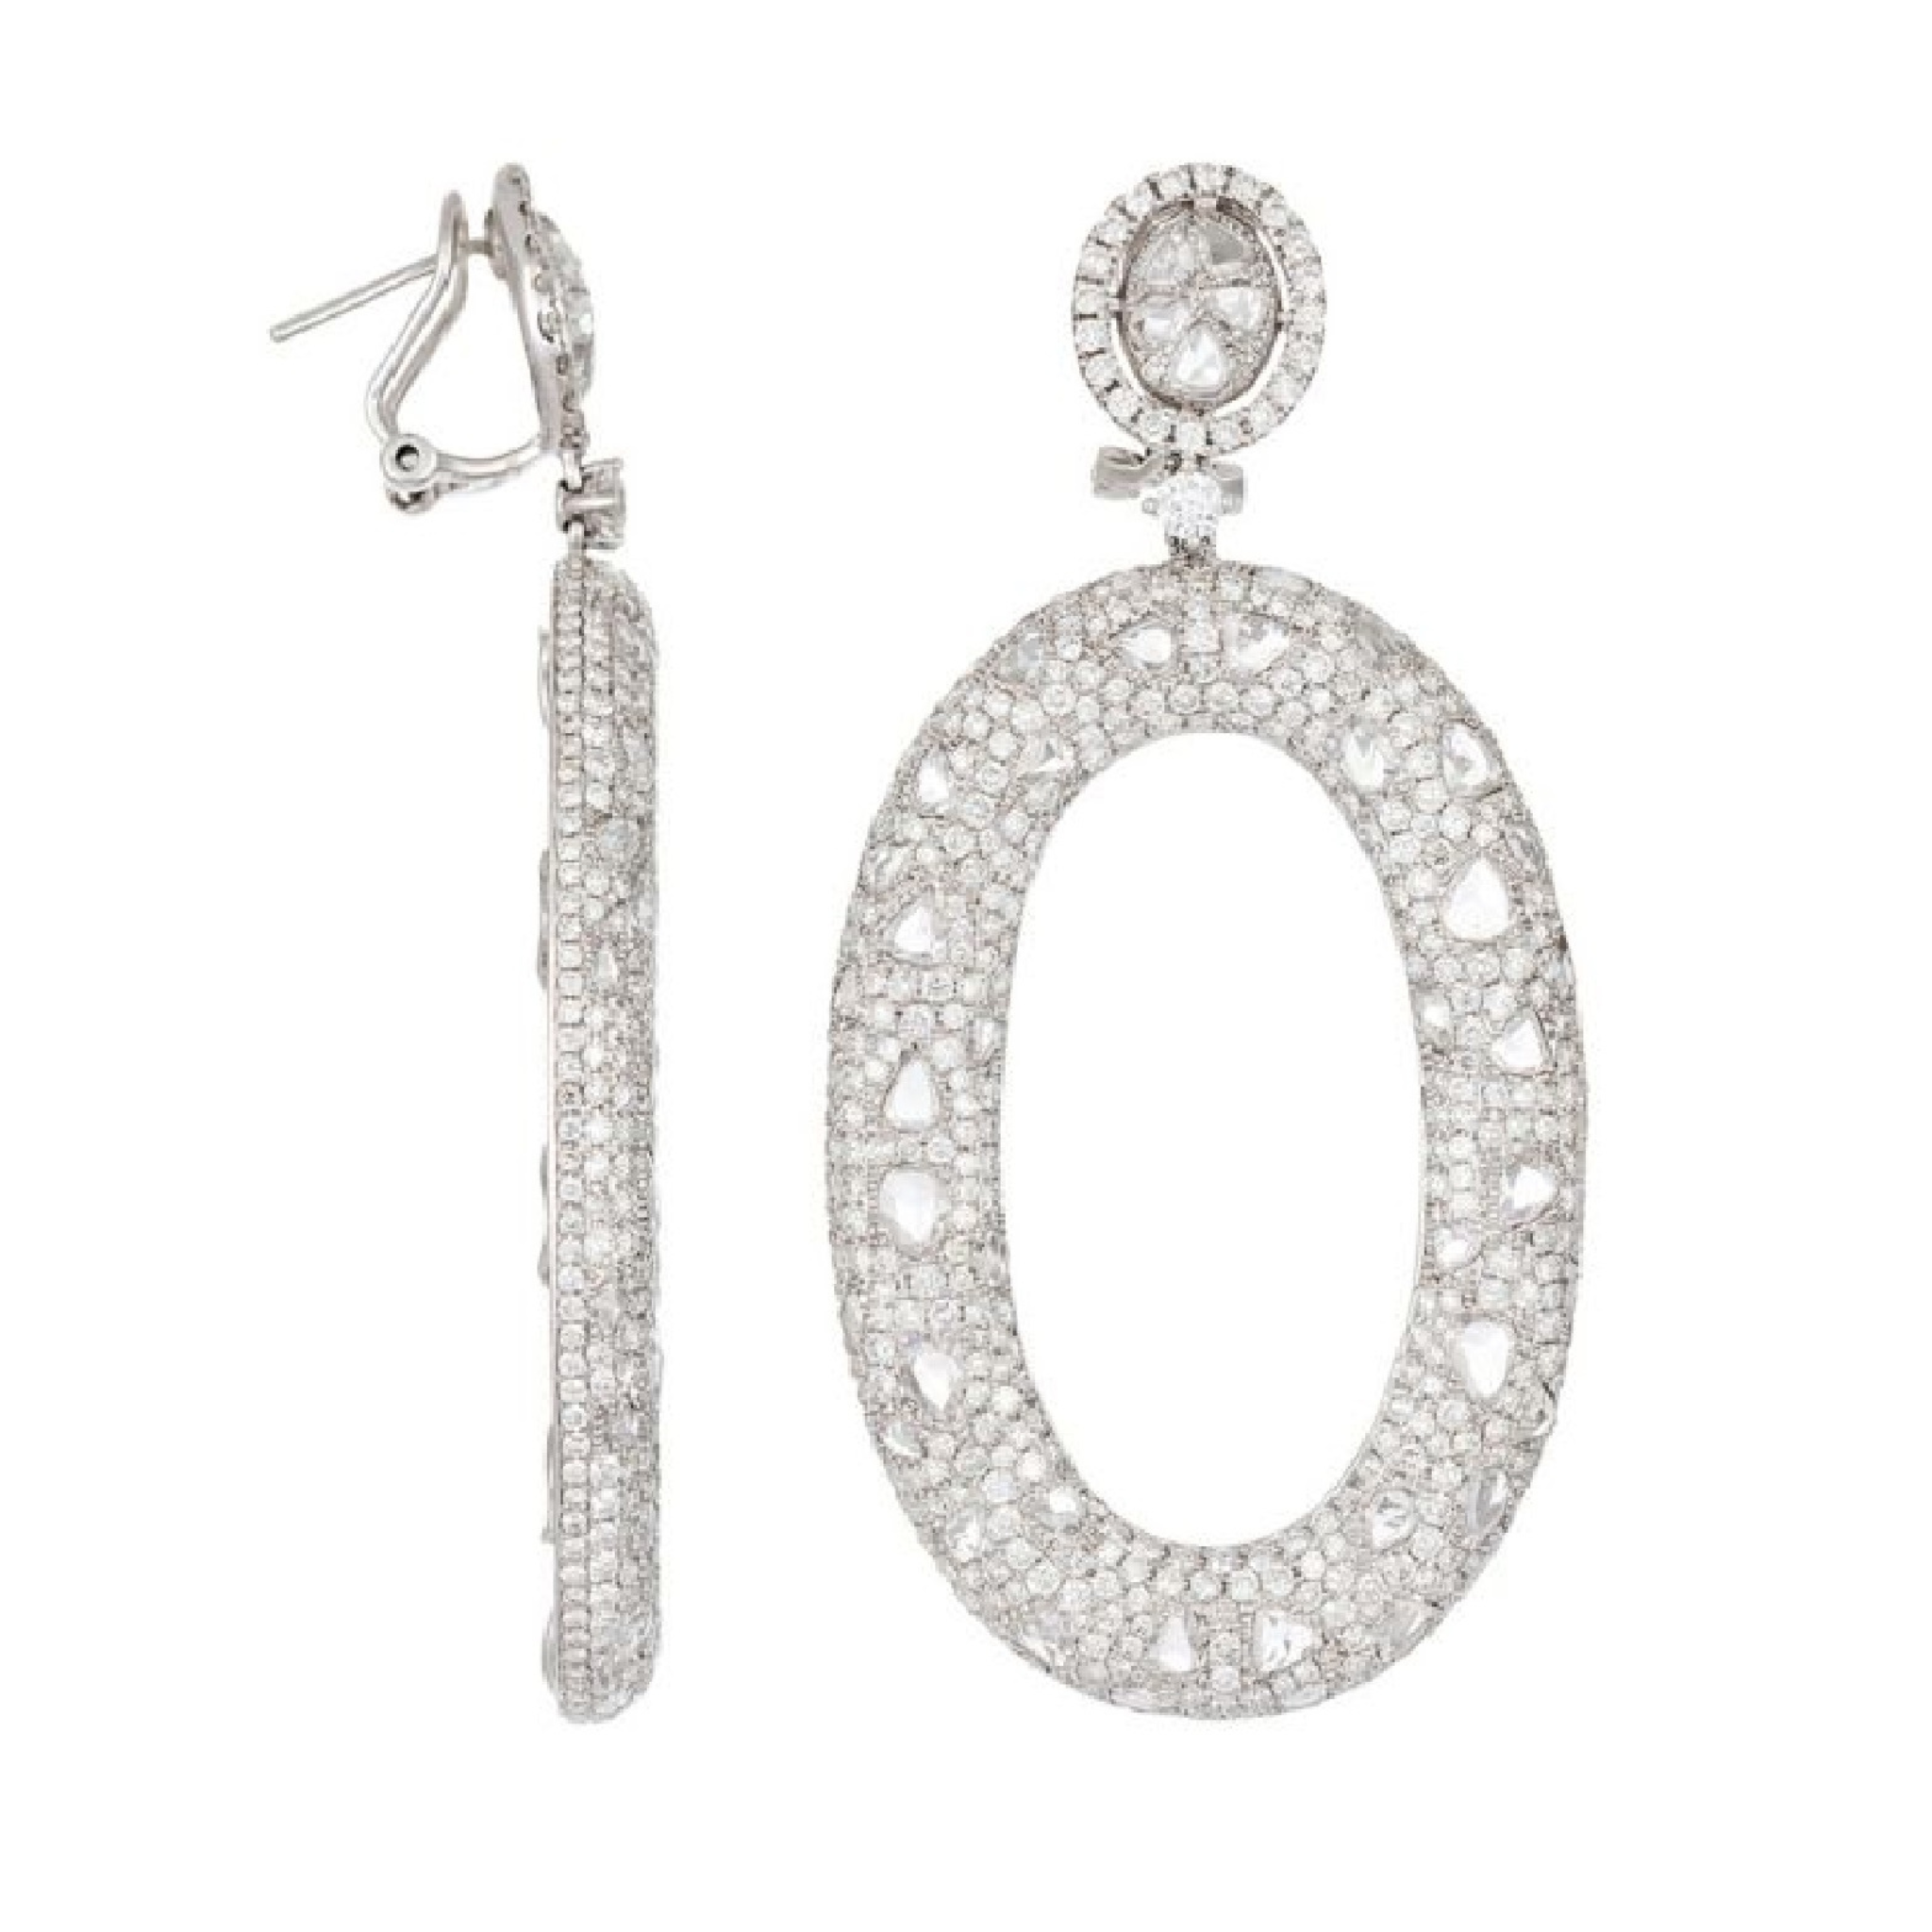 18 kt white gold diamond fashion earrings adorned with 13.48 cts tw of diamonds of various size and shape.jpg